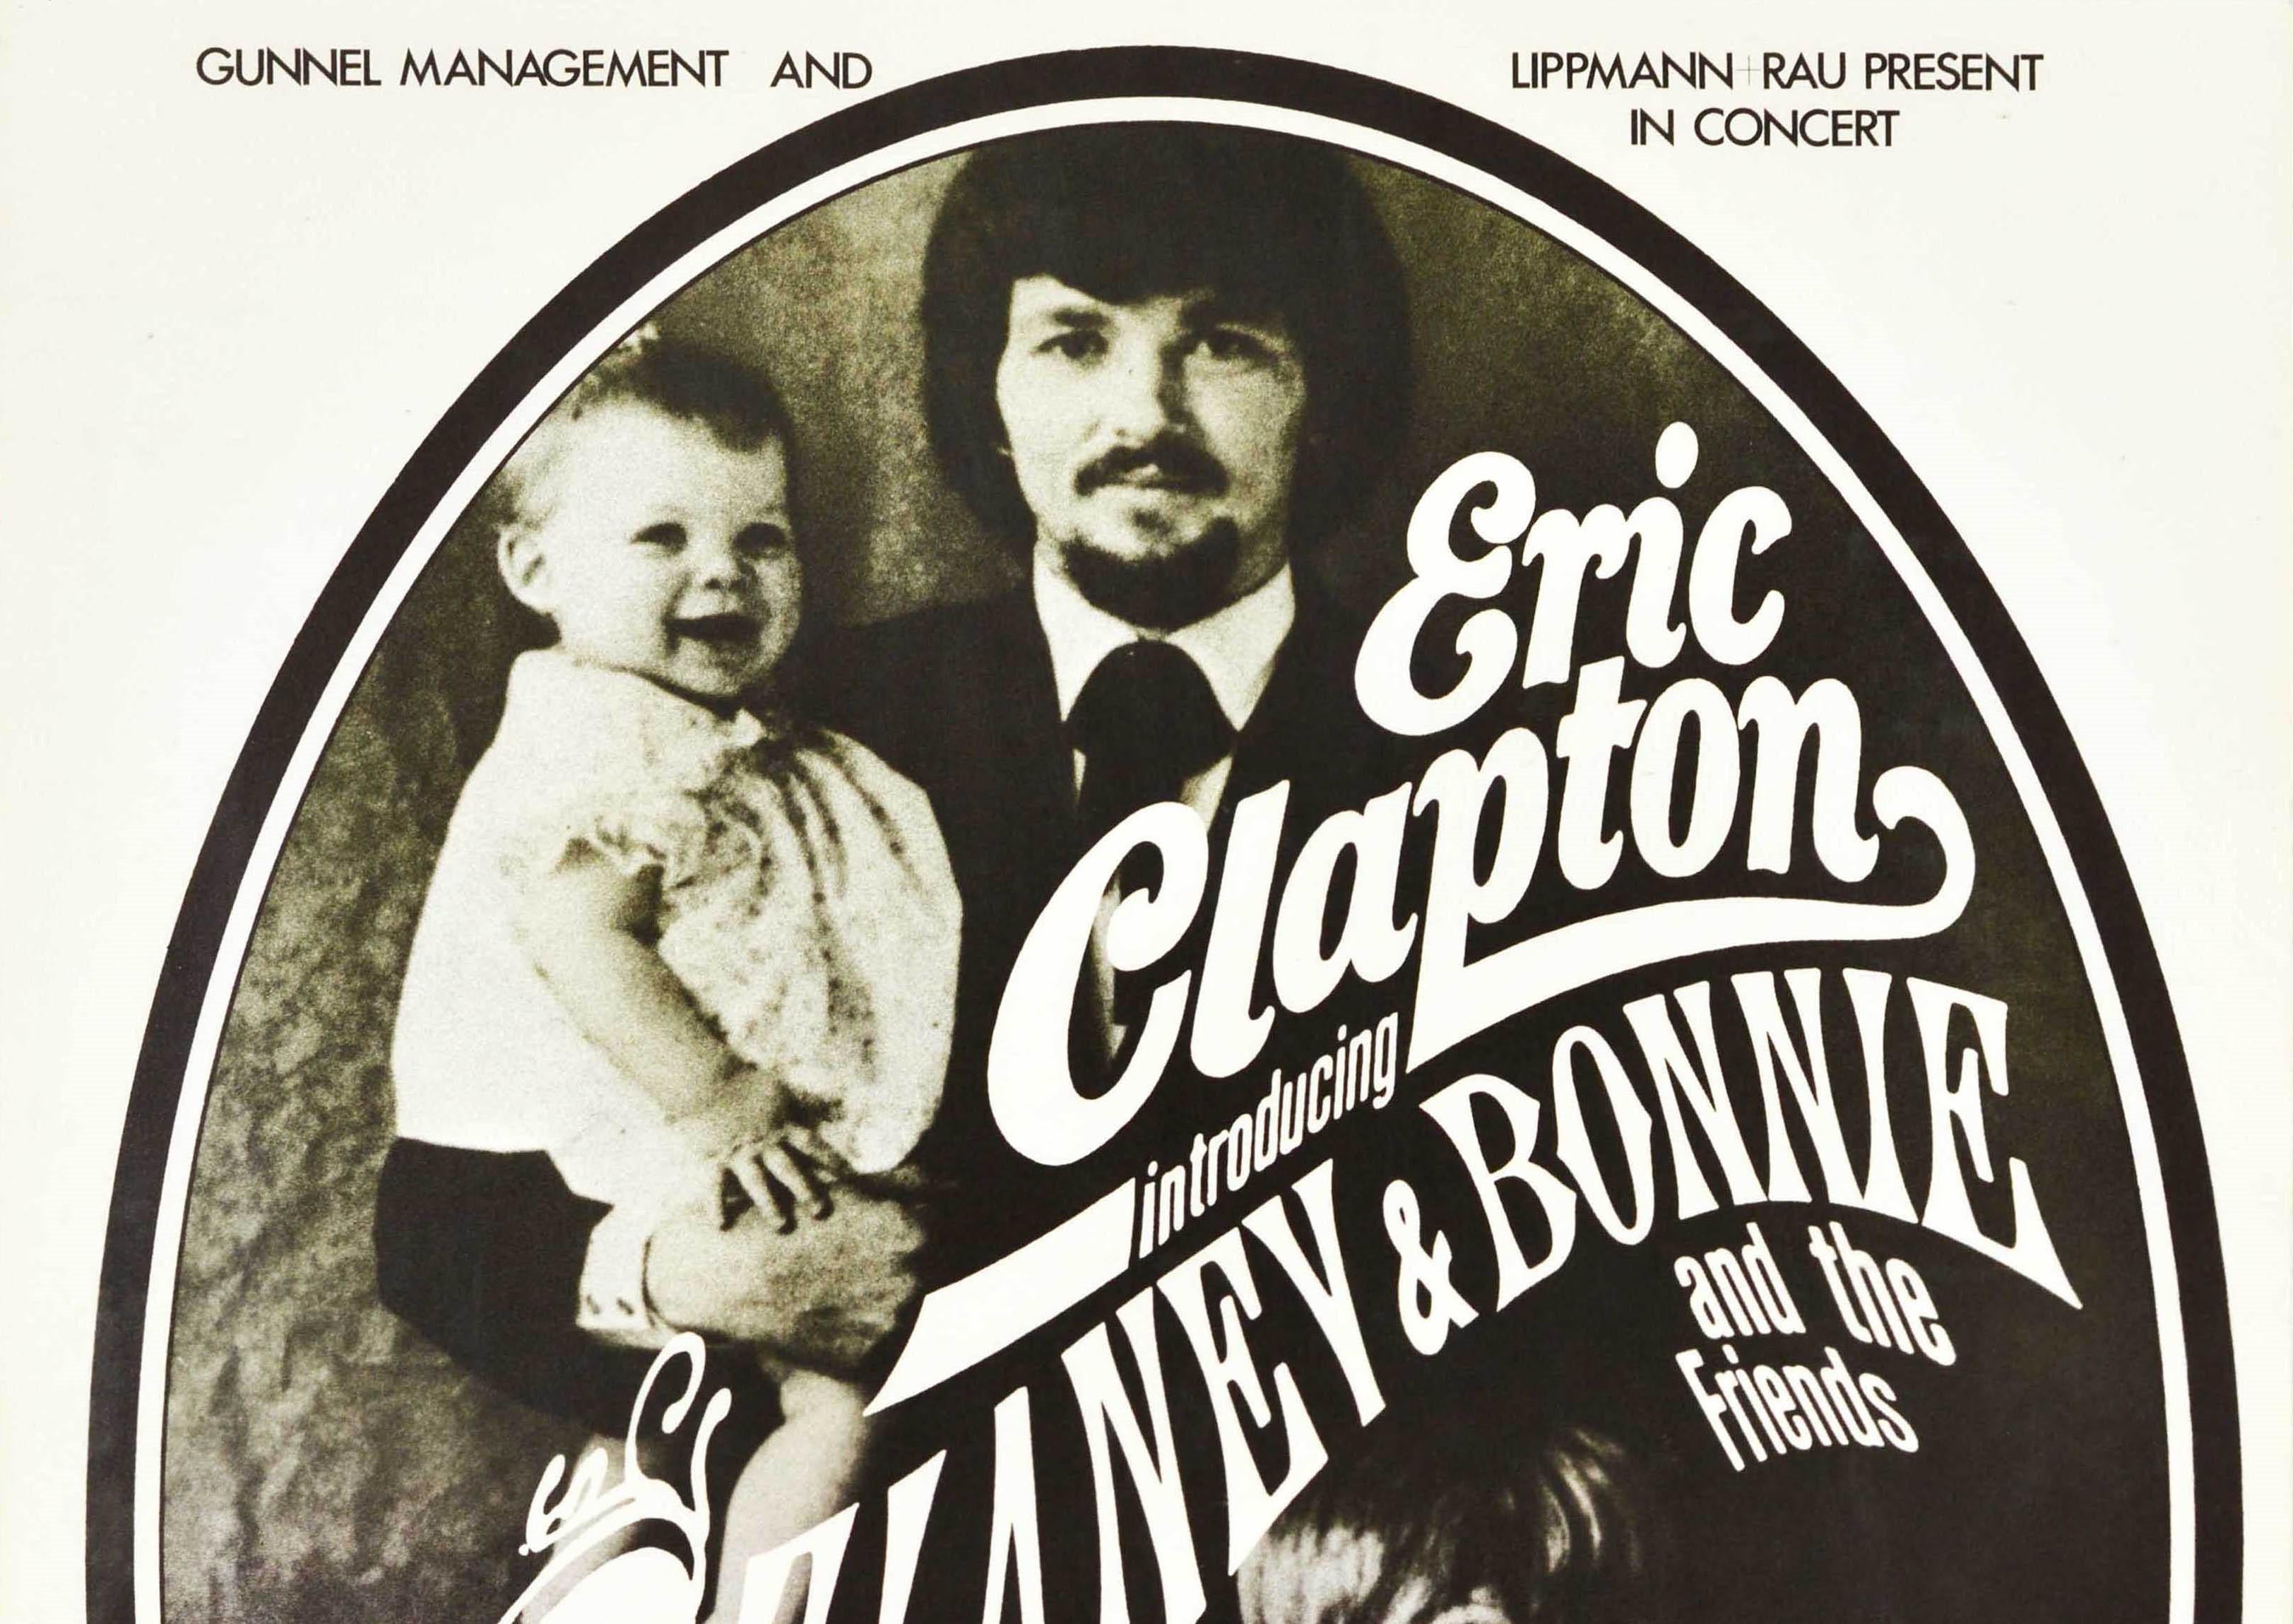 Original vintage music concert poster for Eric Clapton introducing Delaney & Bonnie and the Friends featuring P.P. Arnold and Ashton, Gardner & Dyke presented by Gunnel Management and Lippmann + Rau featuring a black and white family style